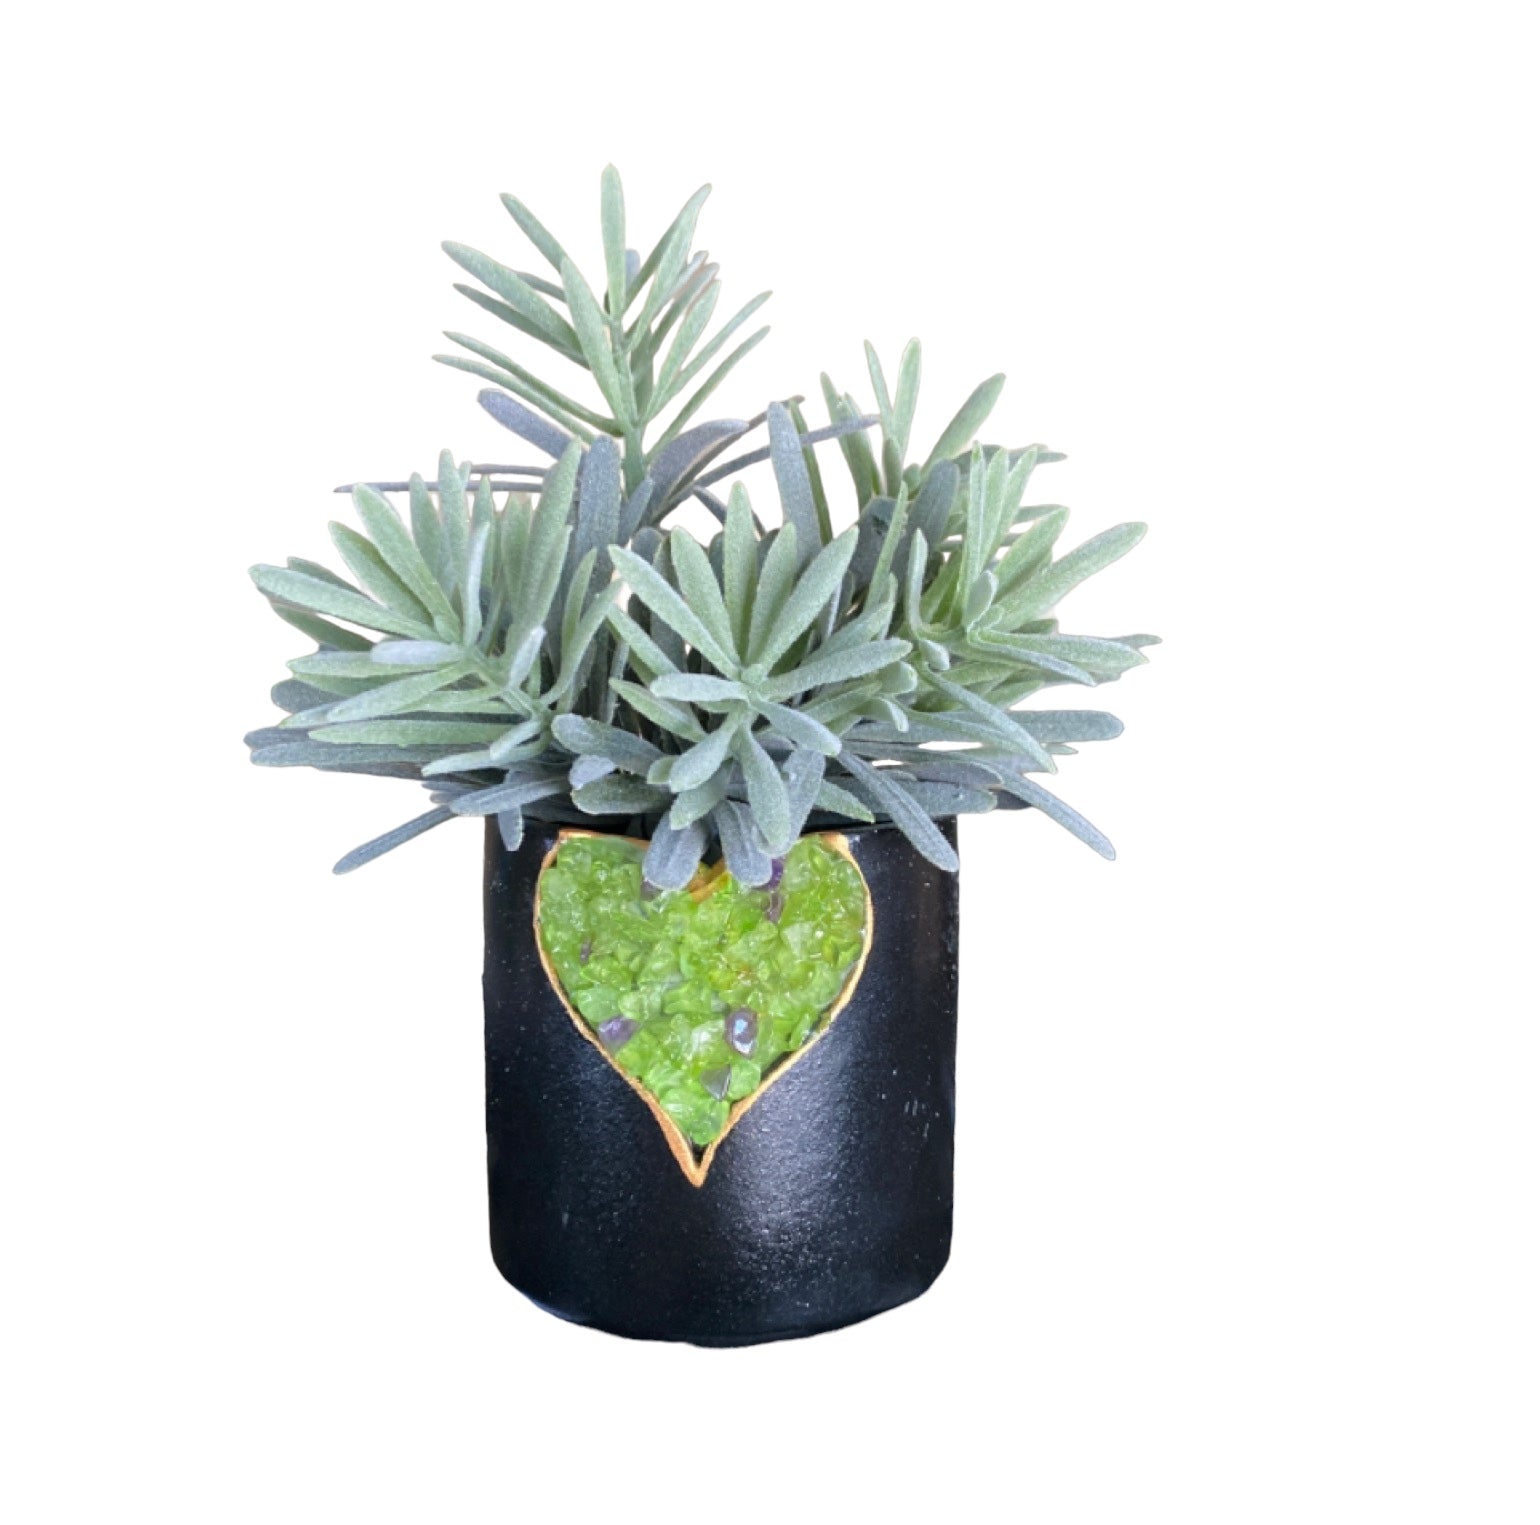 Heart Crystal Plant Pot Planter Garden - The Renmy Store Homewares & Gifts 